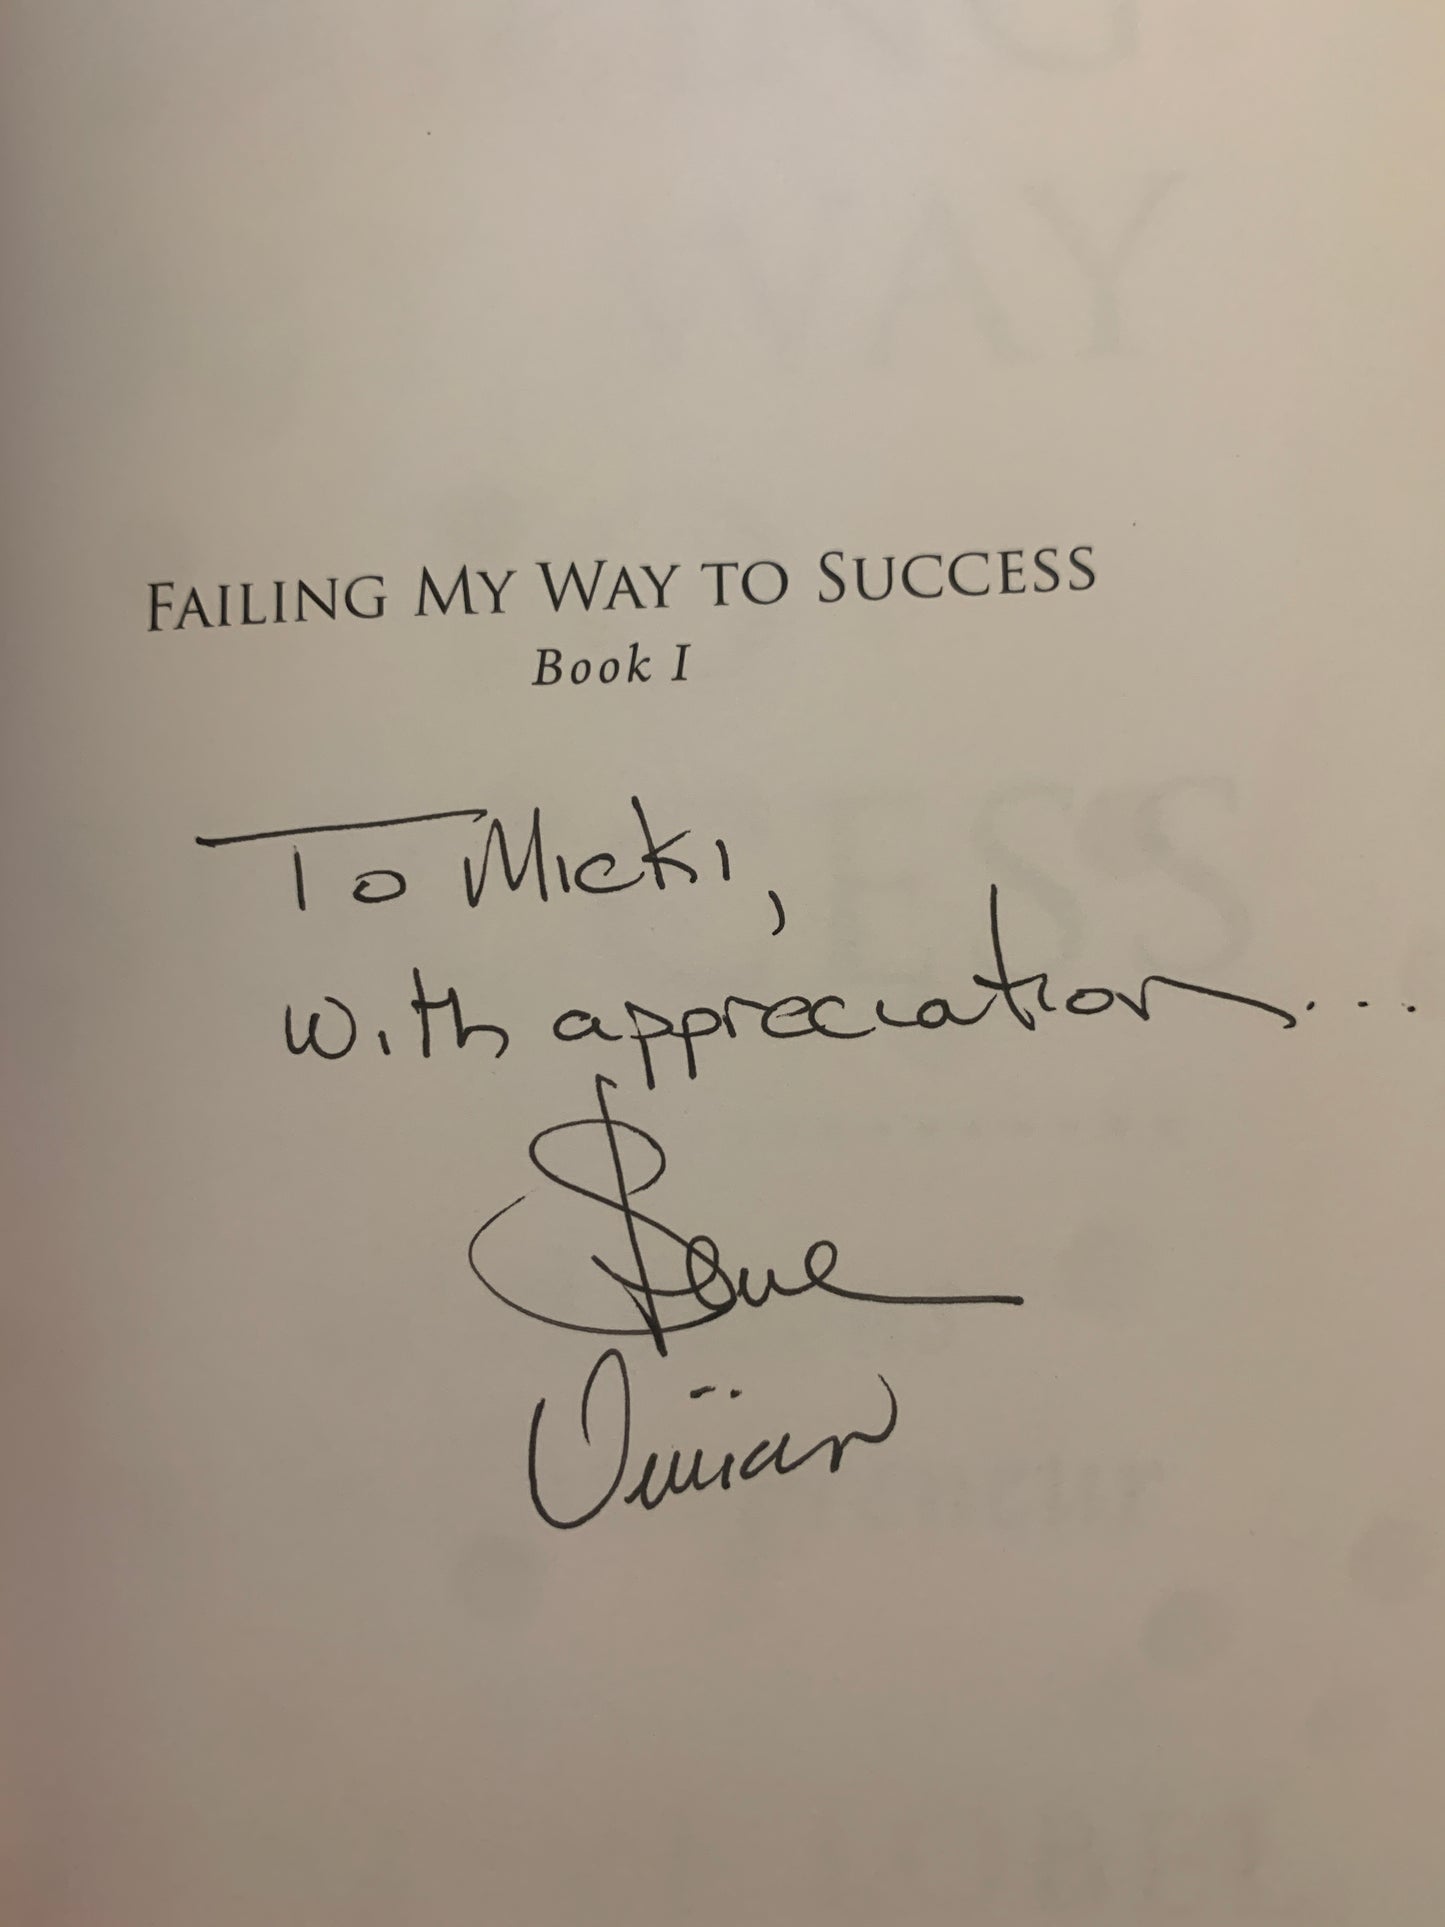 Failing my Way to Success: Life Lessons of an Entrepreneur by Lobel [2015 · SIGNED]